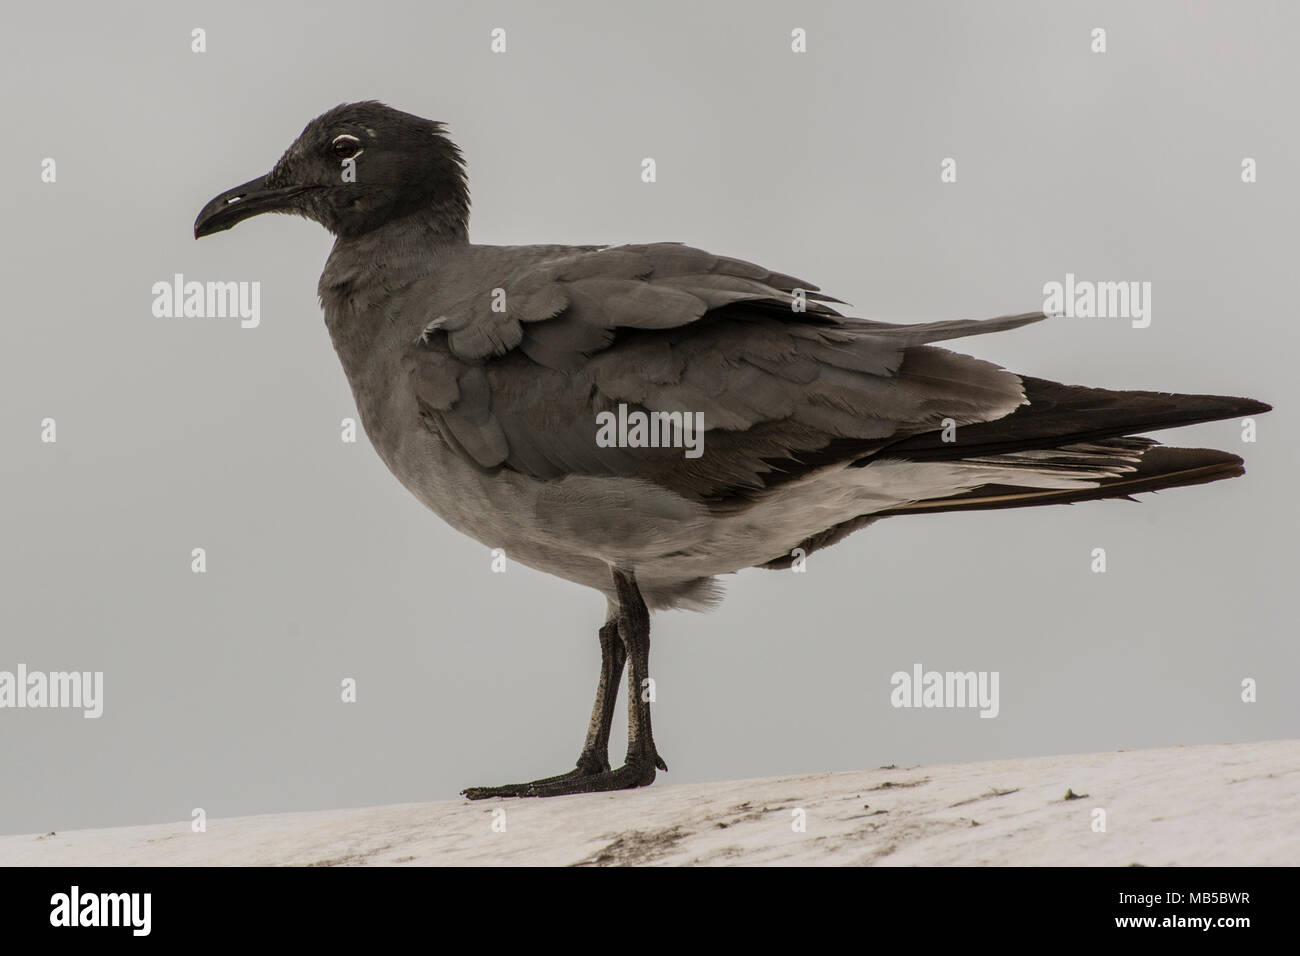 A lava gull (Leucophaeus fuliginosus) from the Galapagos islands.  This species is considered to be the rarest gull species in the world. Stock Photo